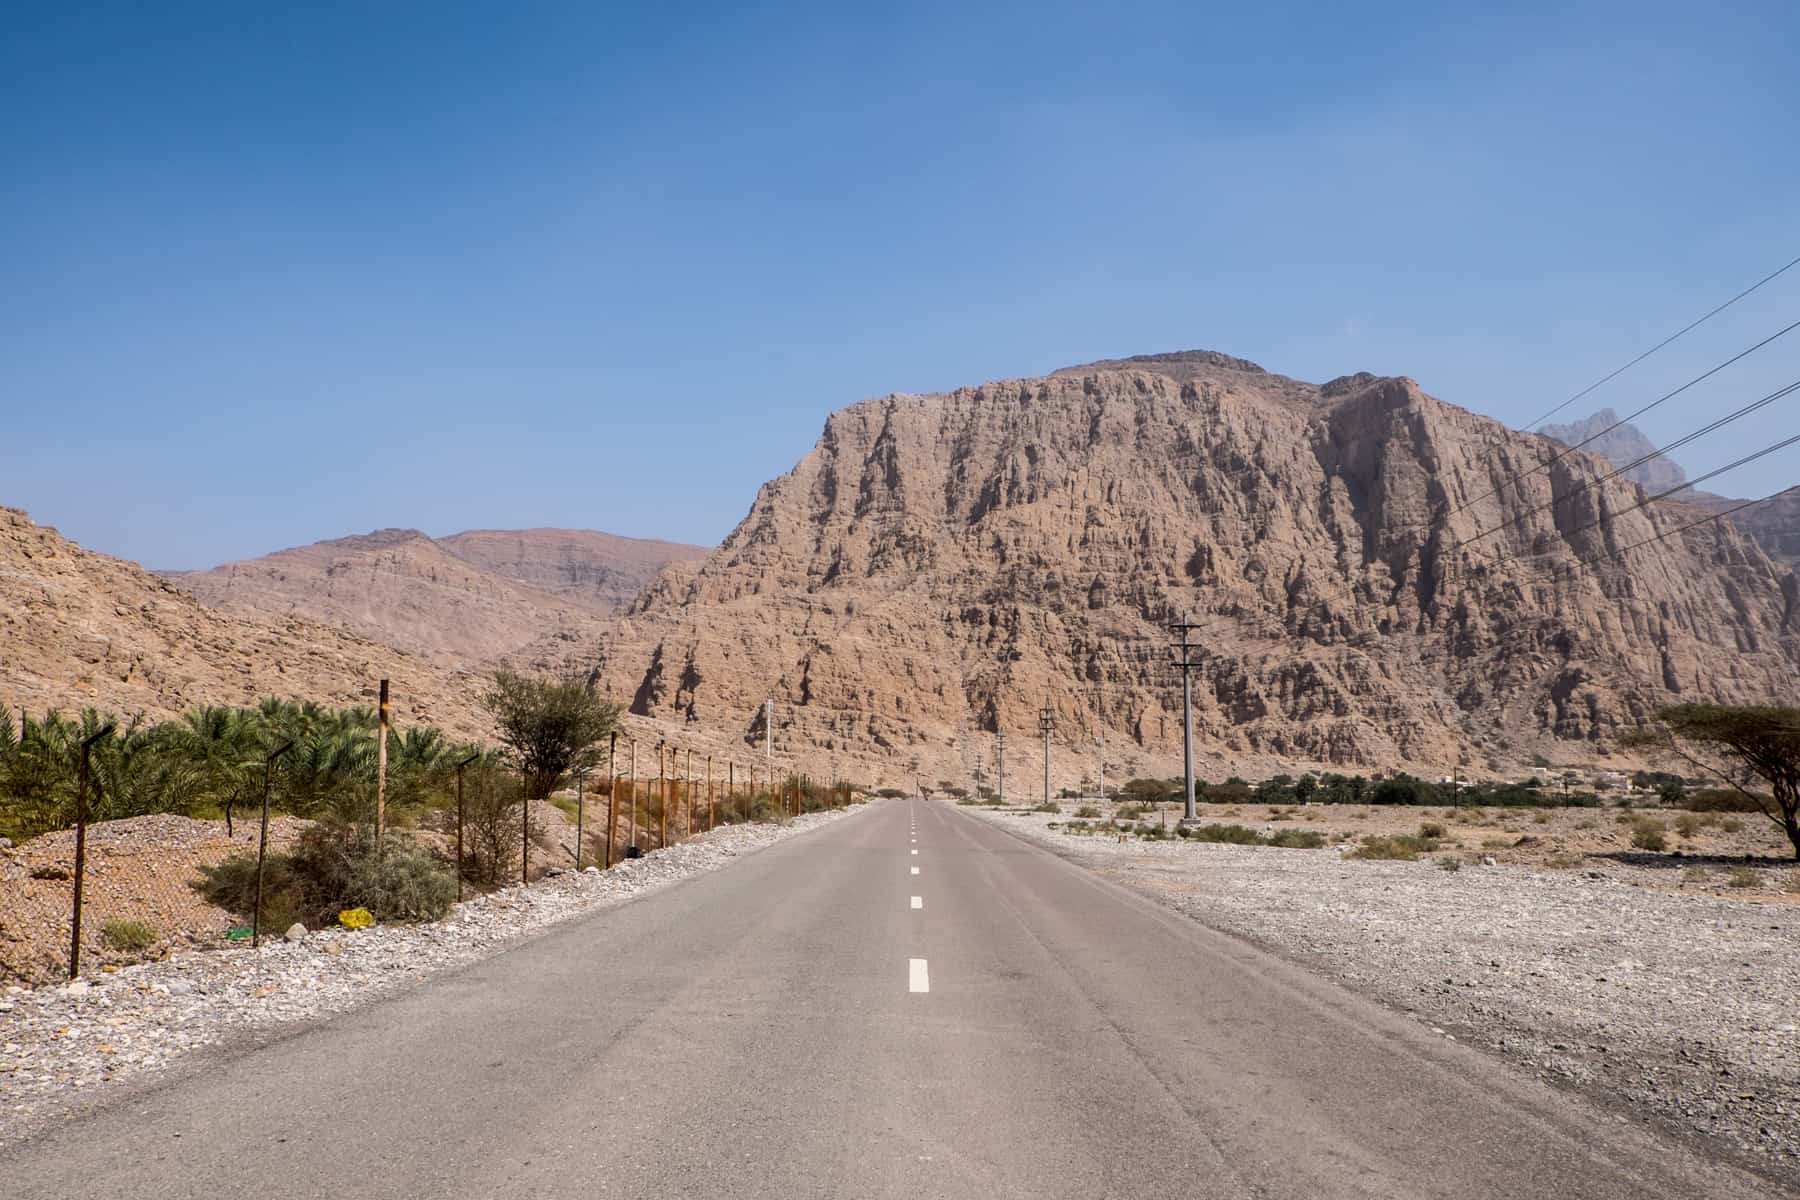 View of a paved road leading towards a golden brown rock face and low mountain range. A few green bushy trees grow from the desert sands either side of the road.